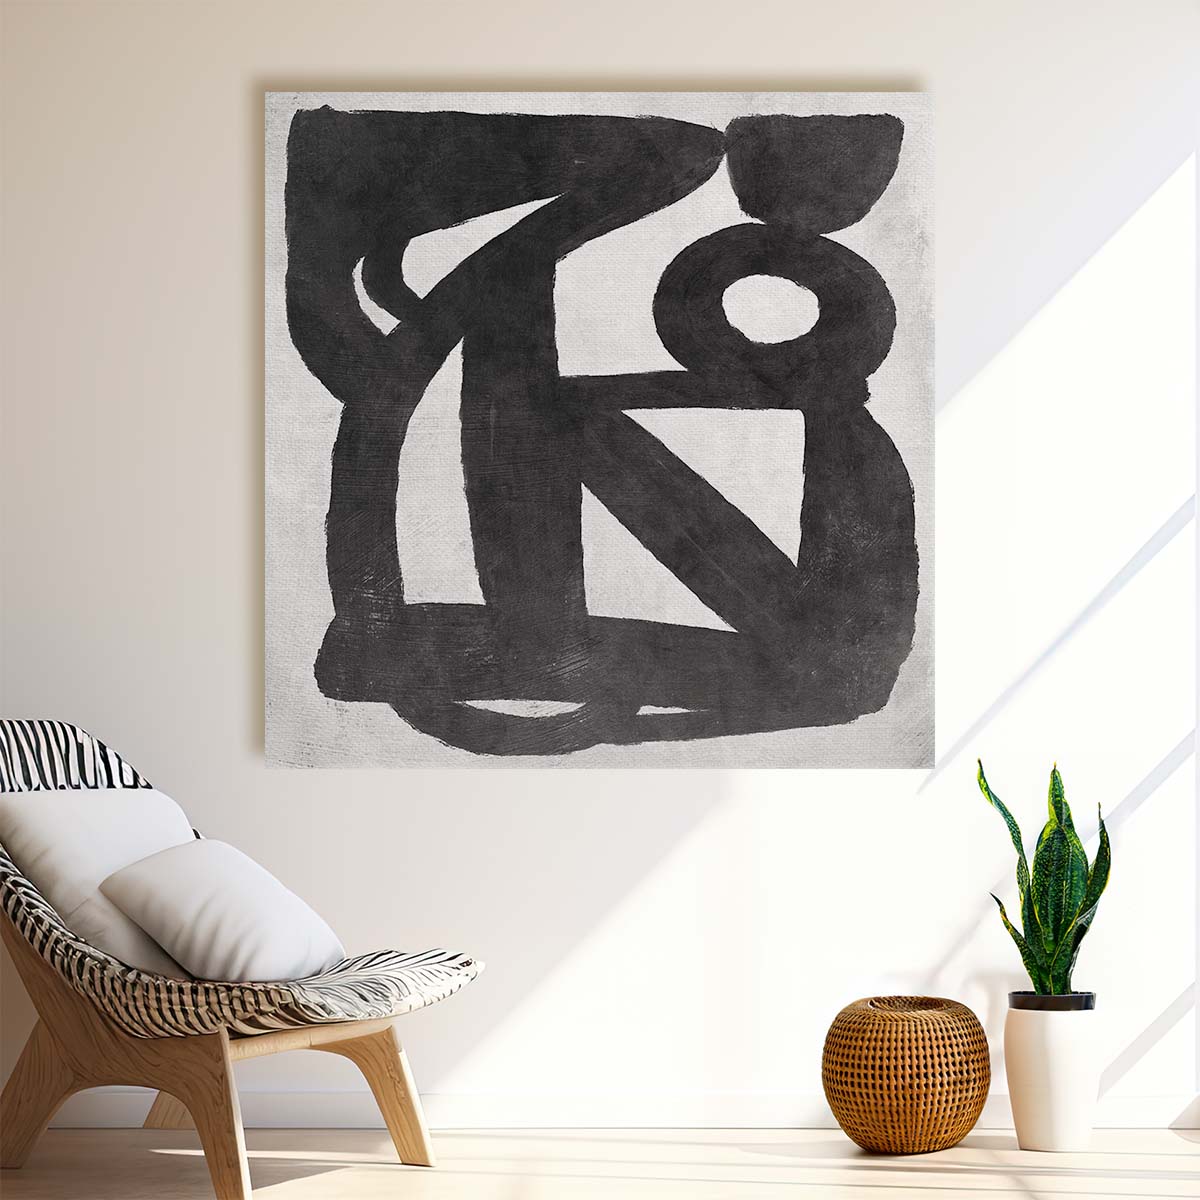 Dan Hobday's "Modern Abstract Melody No. 4" Painted Illustration Wall Art by Luxuriance Designs. Made in USA.